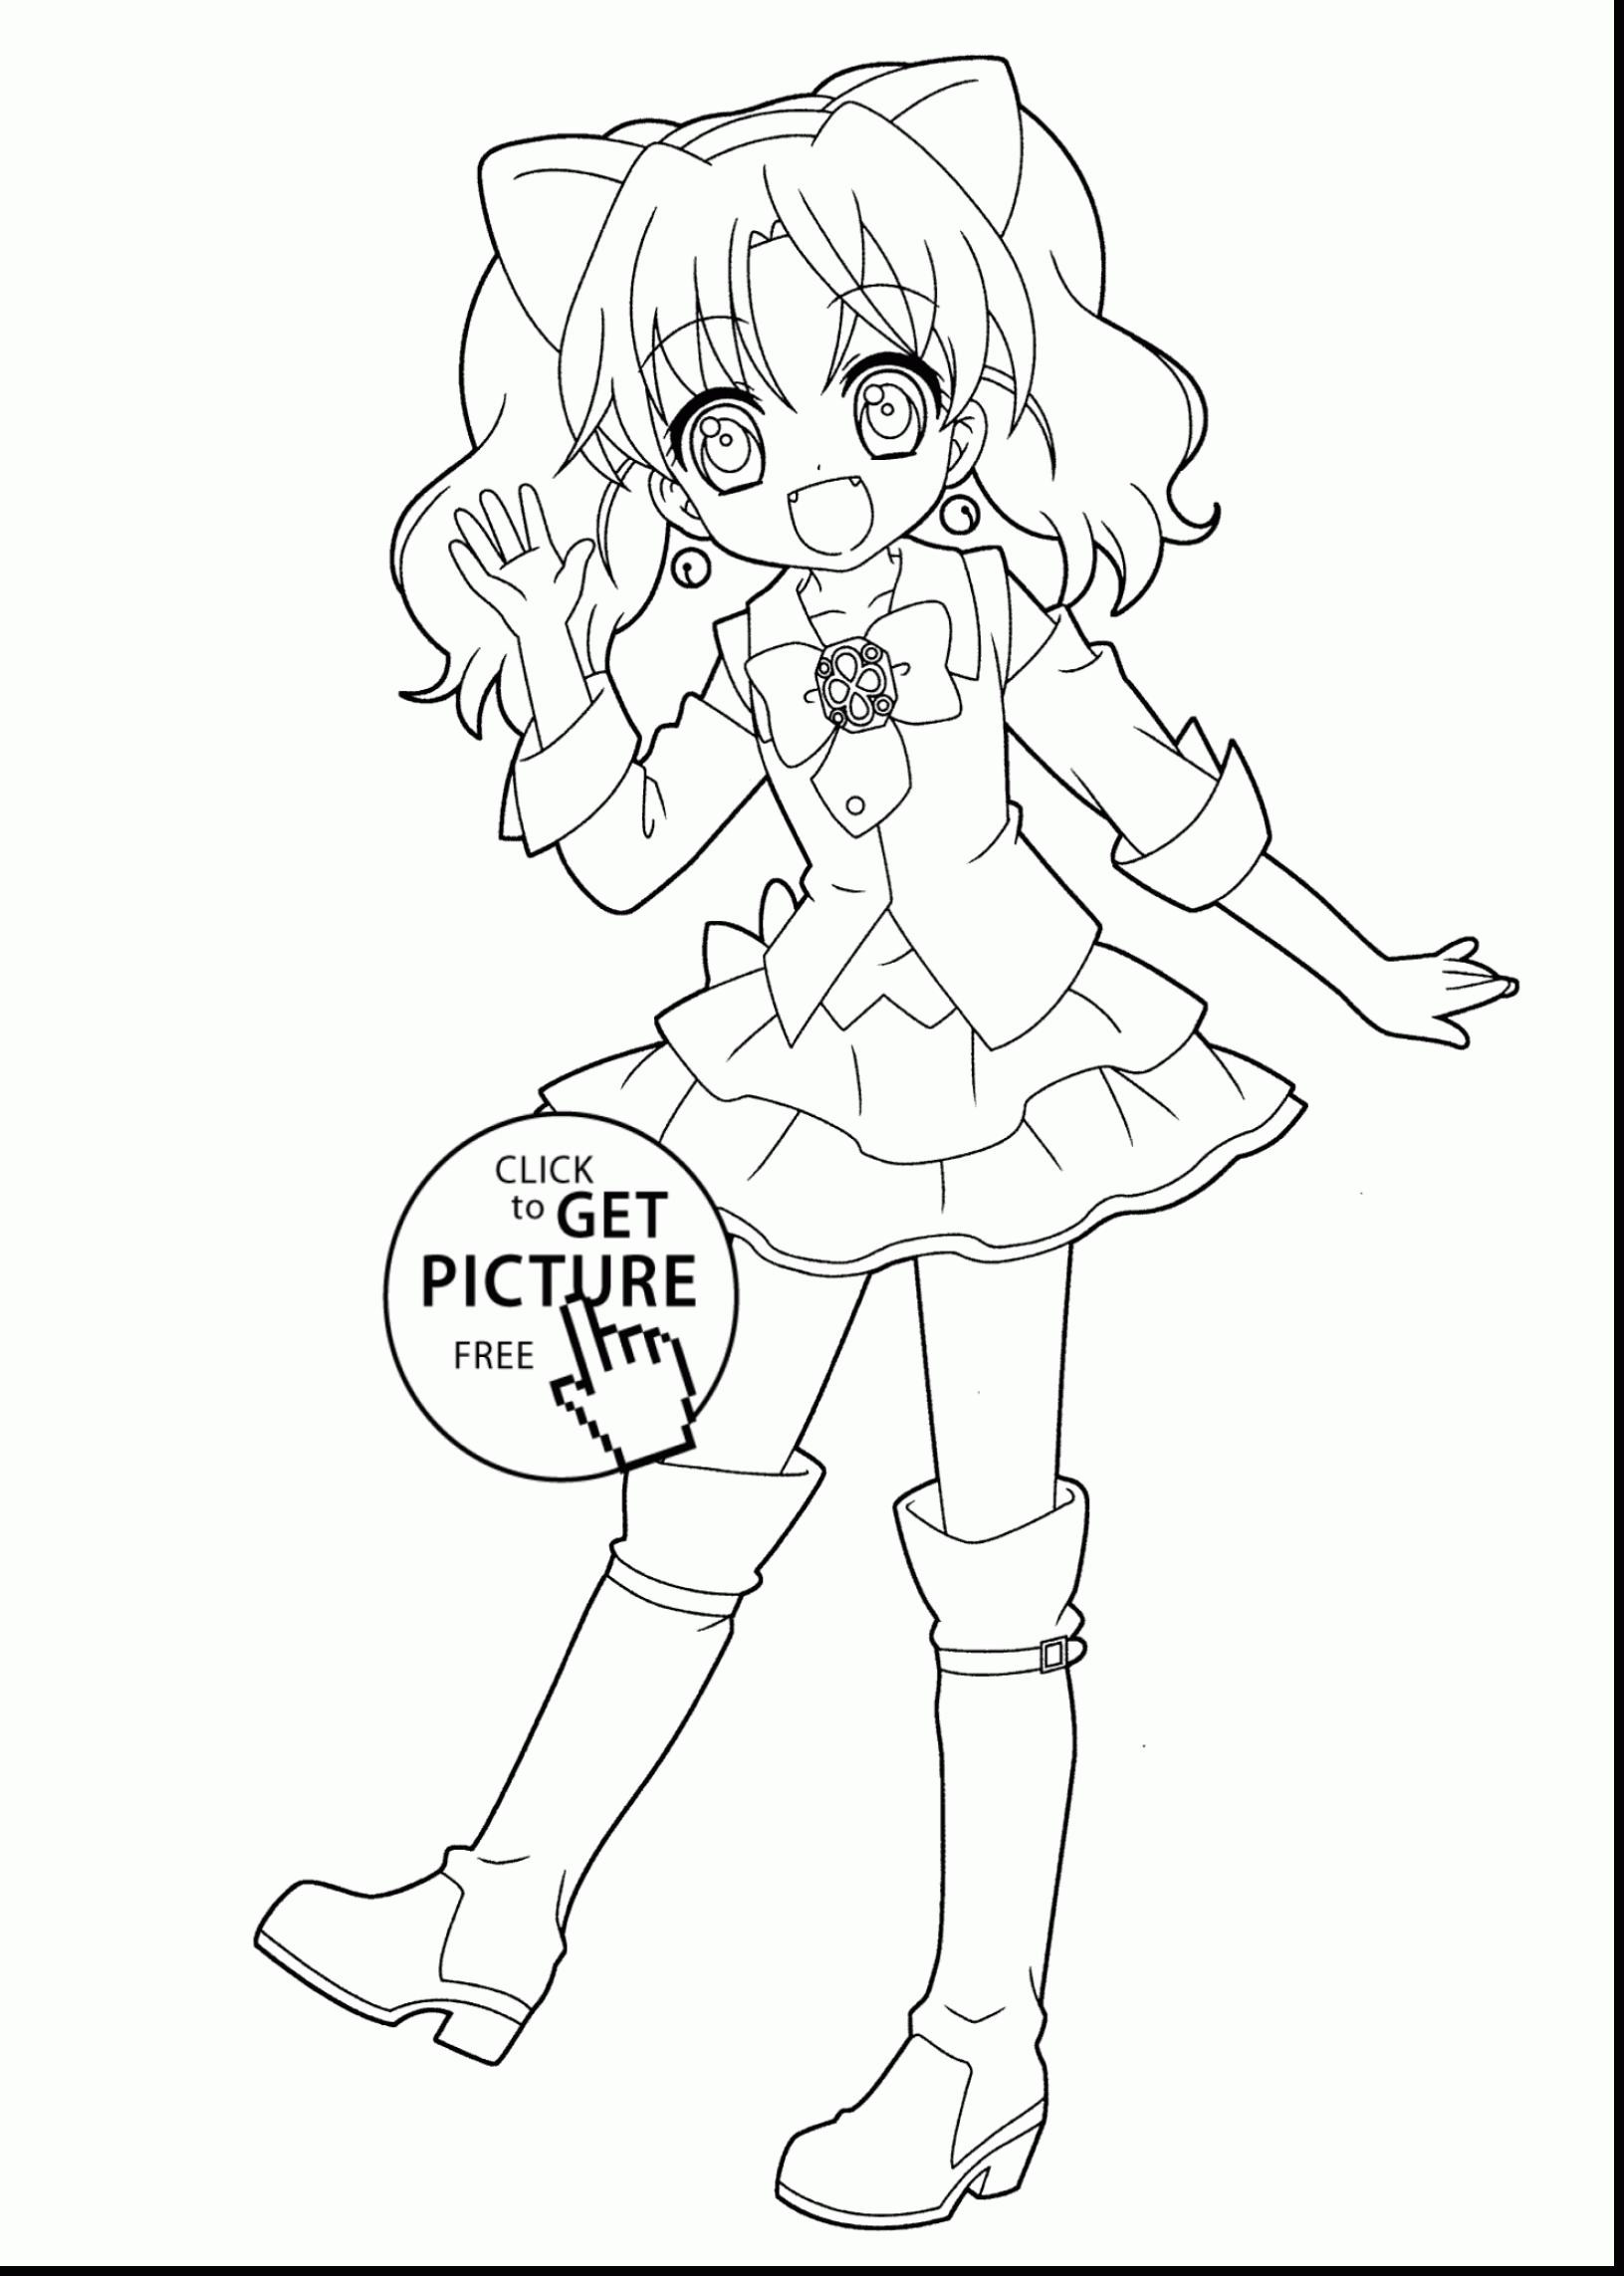 Coloring Pages For Girls 11 And Up Anime Griffens
 Anime Girl Coloring Pages To Print